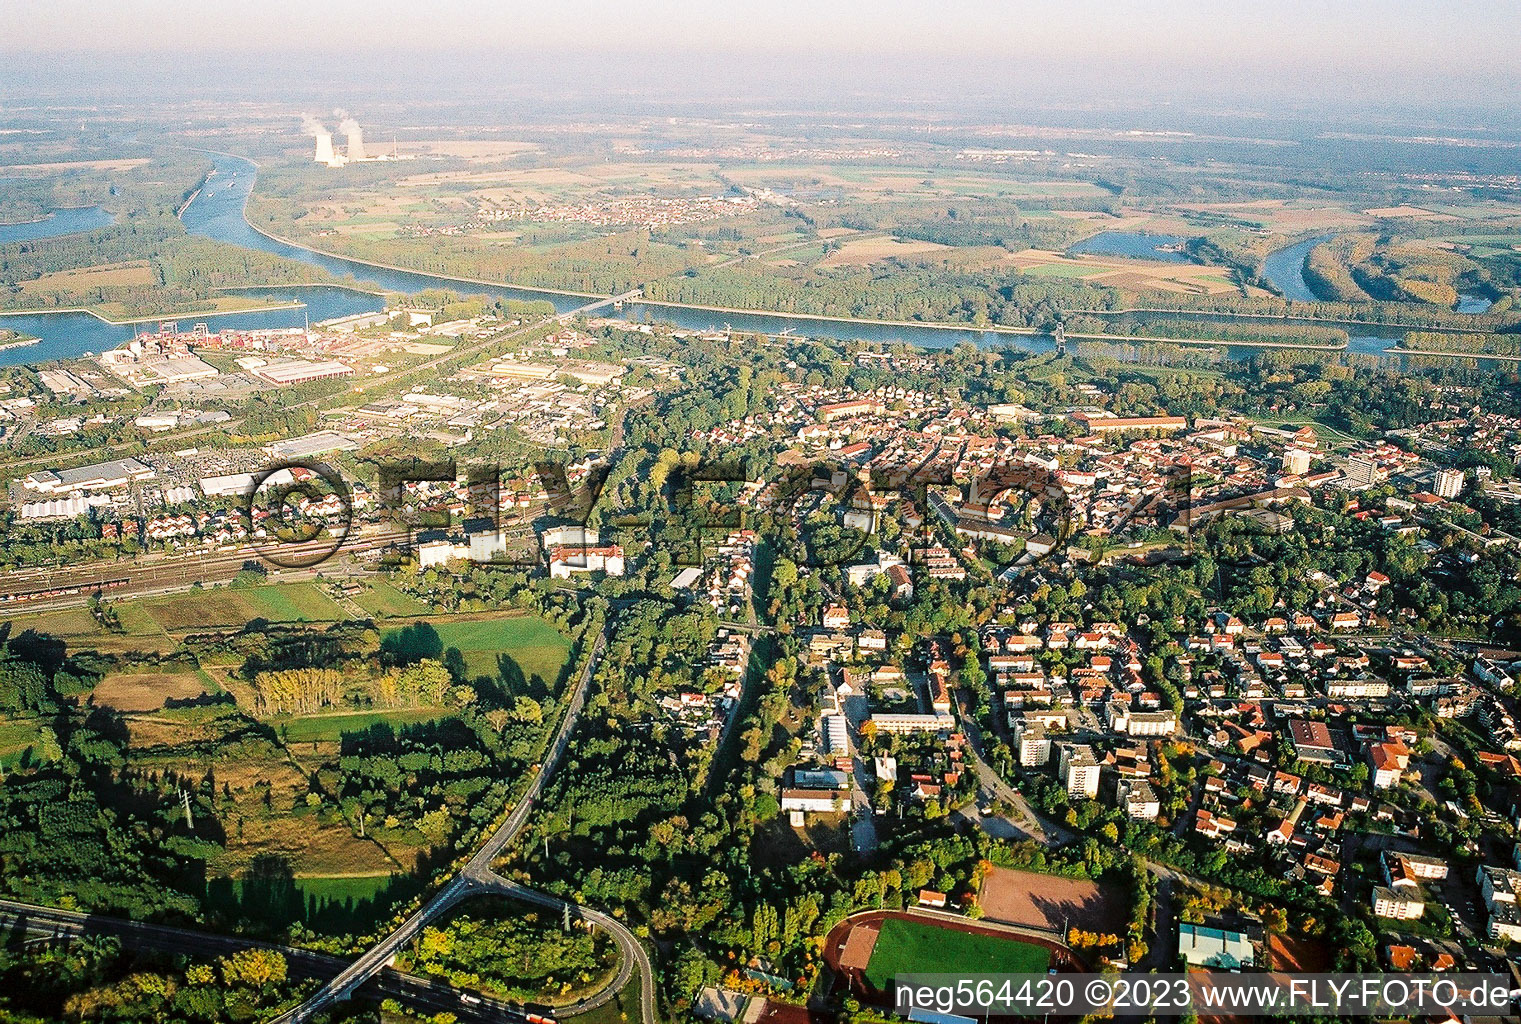 From the southwest in Germersheim in the state Rhineland-Palatinate, Germany